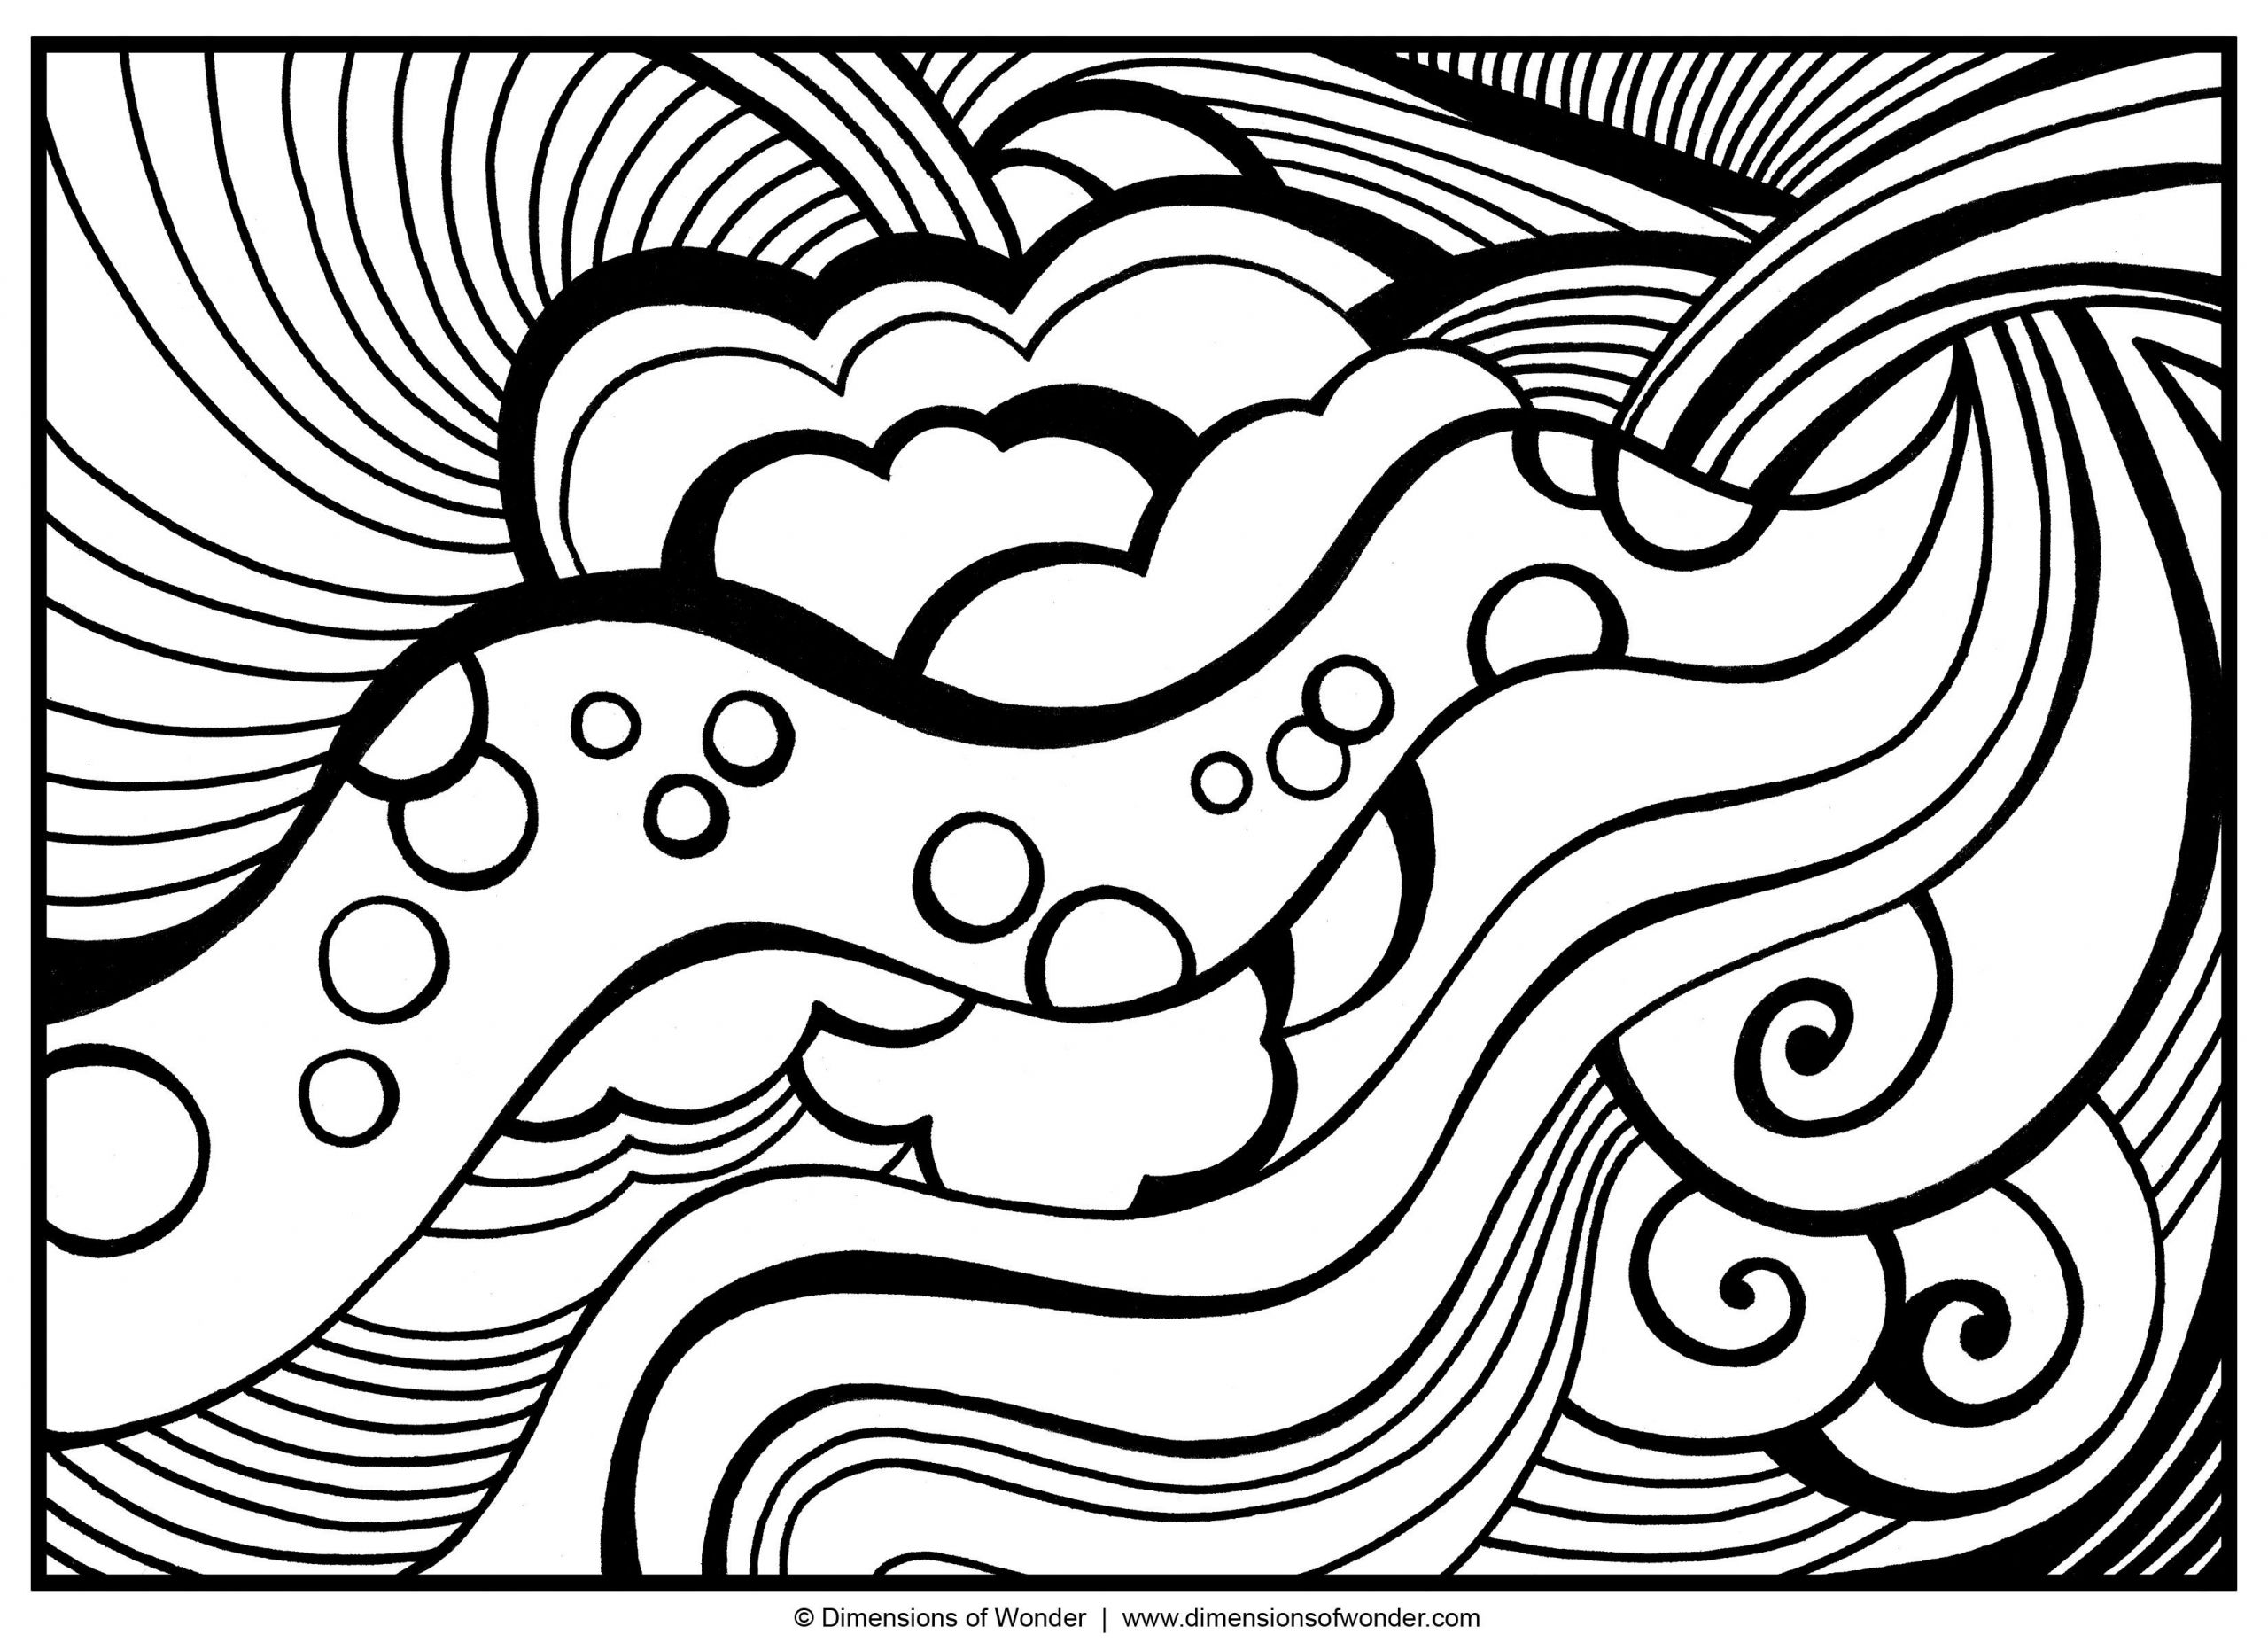 Large Adult Coloring Book
 abstract coloring pages Free